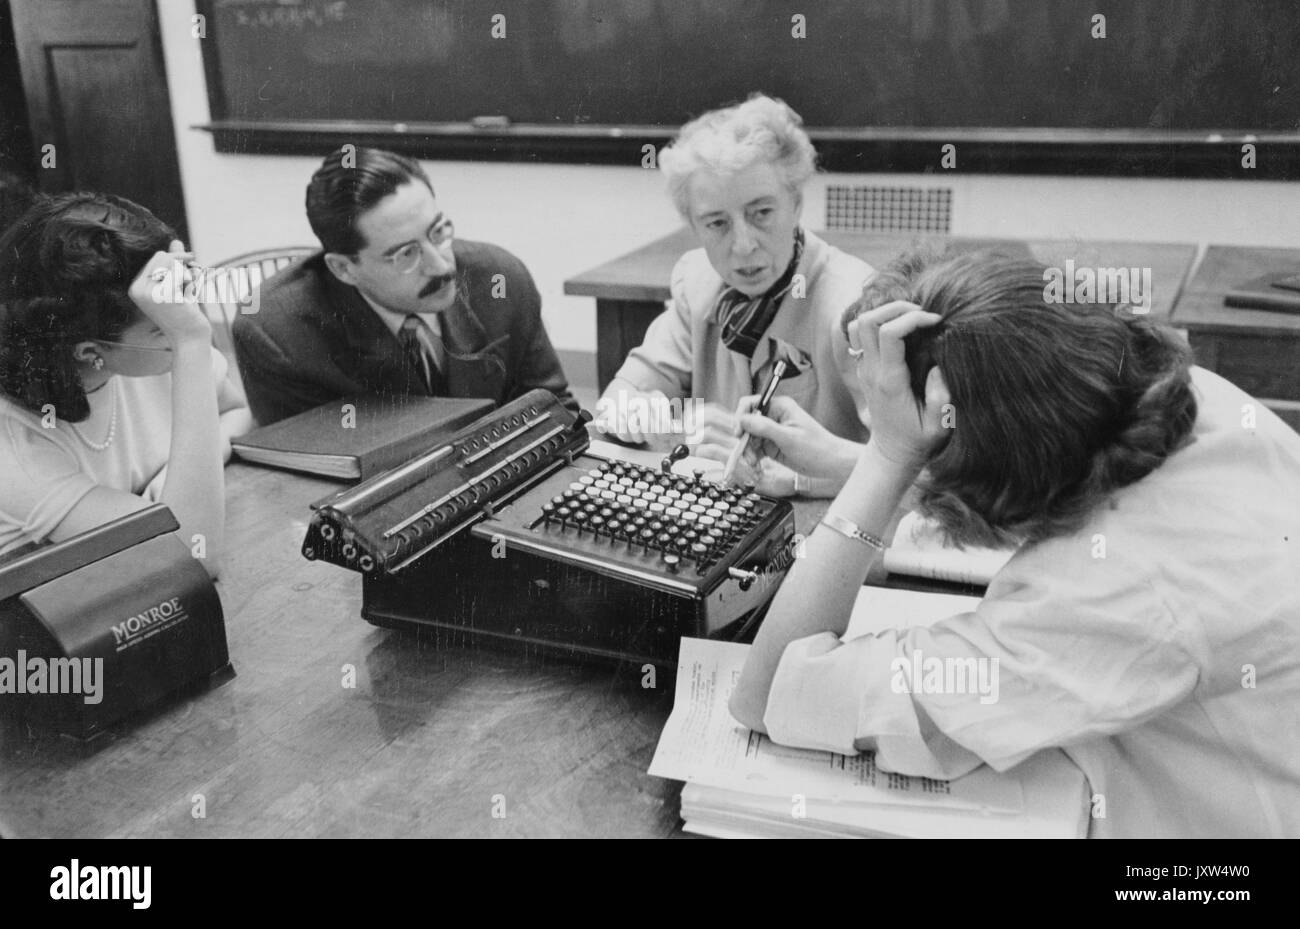 William Bennett Kouwenhoven, Biostatistics Conference Group of unidentified people talking at a table with typewriter visible, 1950. Stock Photo